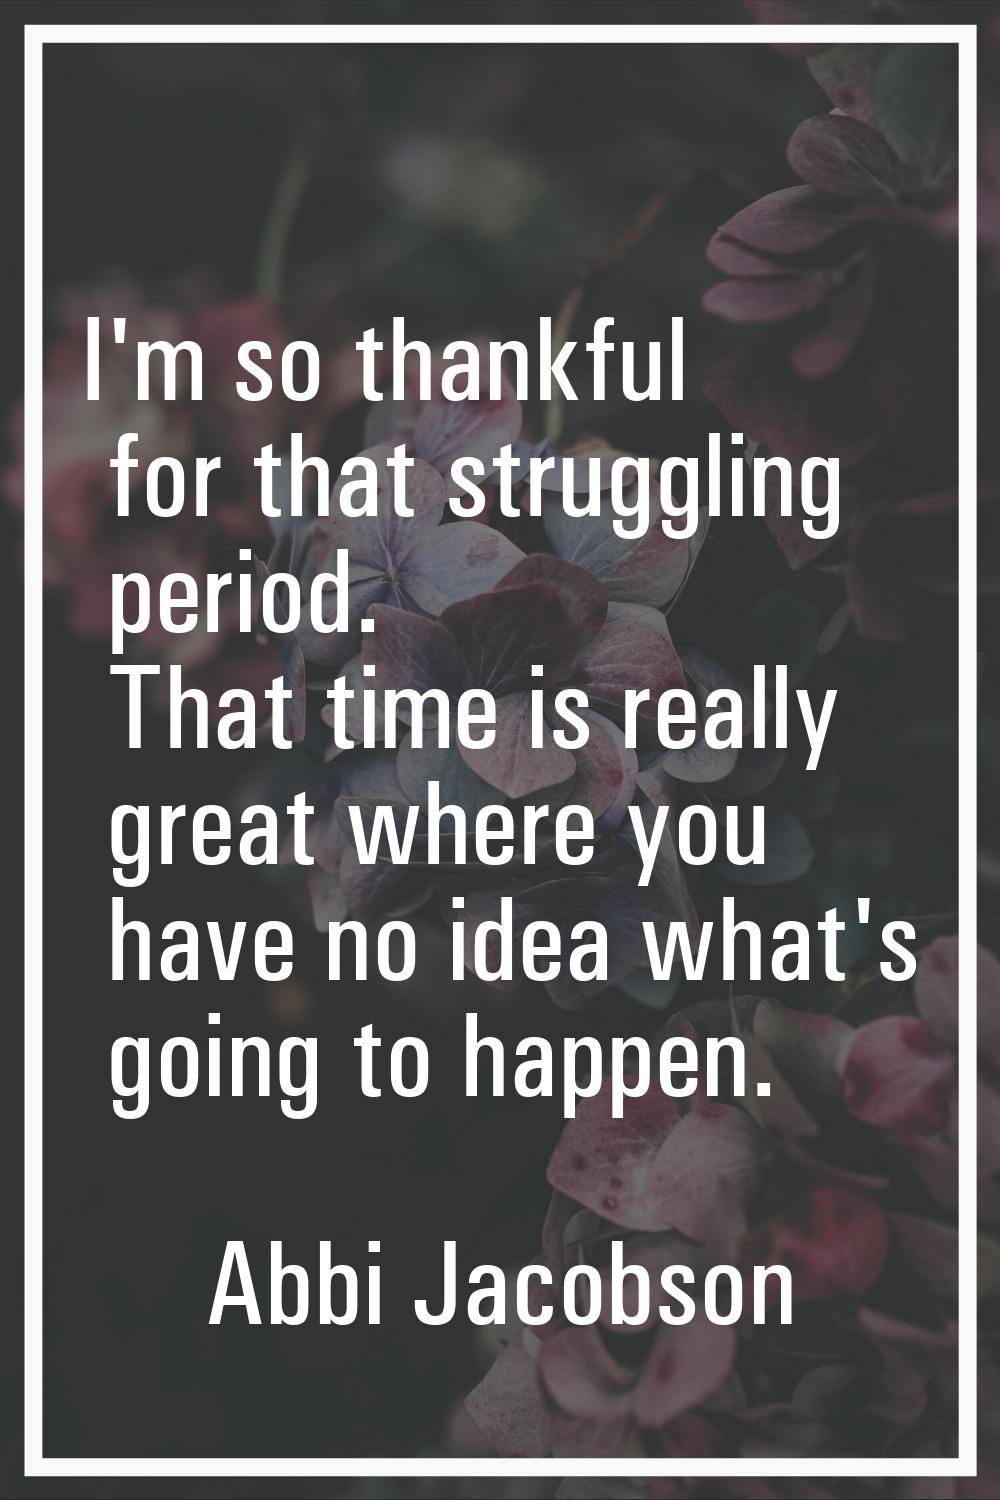 I'm so thankful for that struggling period. That time is really great where you have no idea what's